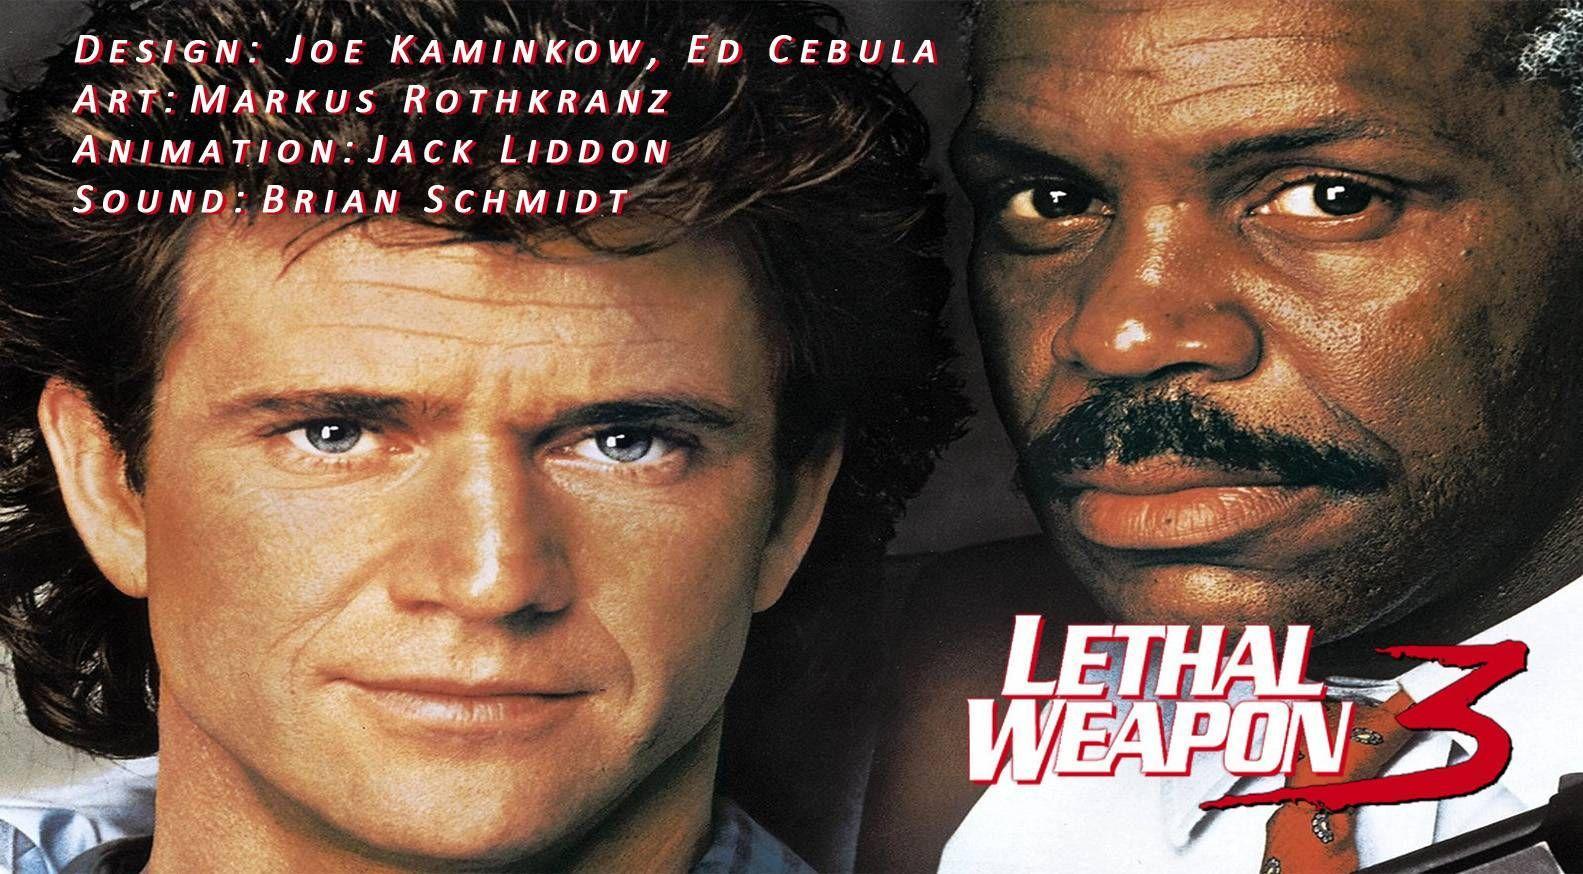 Lethal Weapon 3 information card